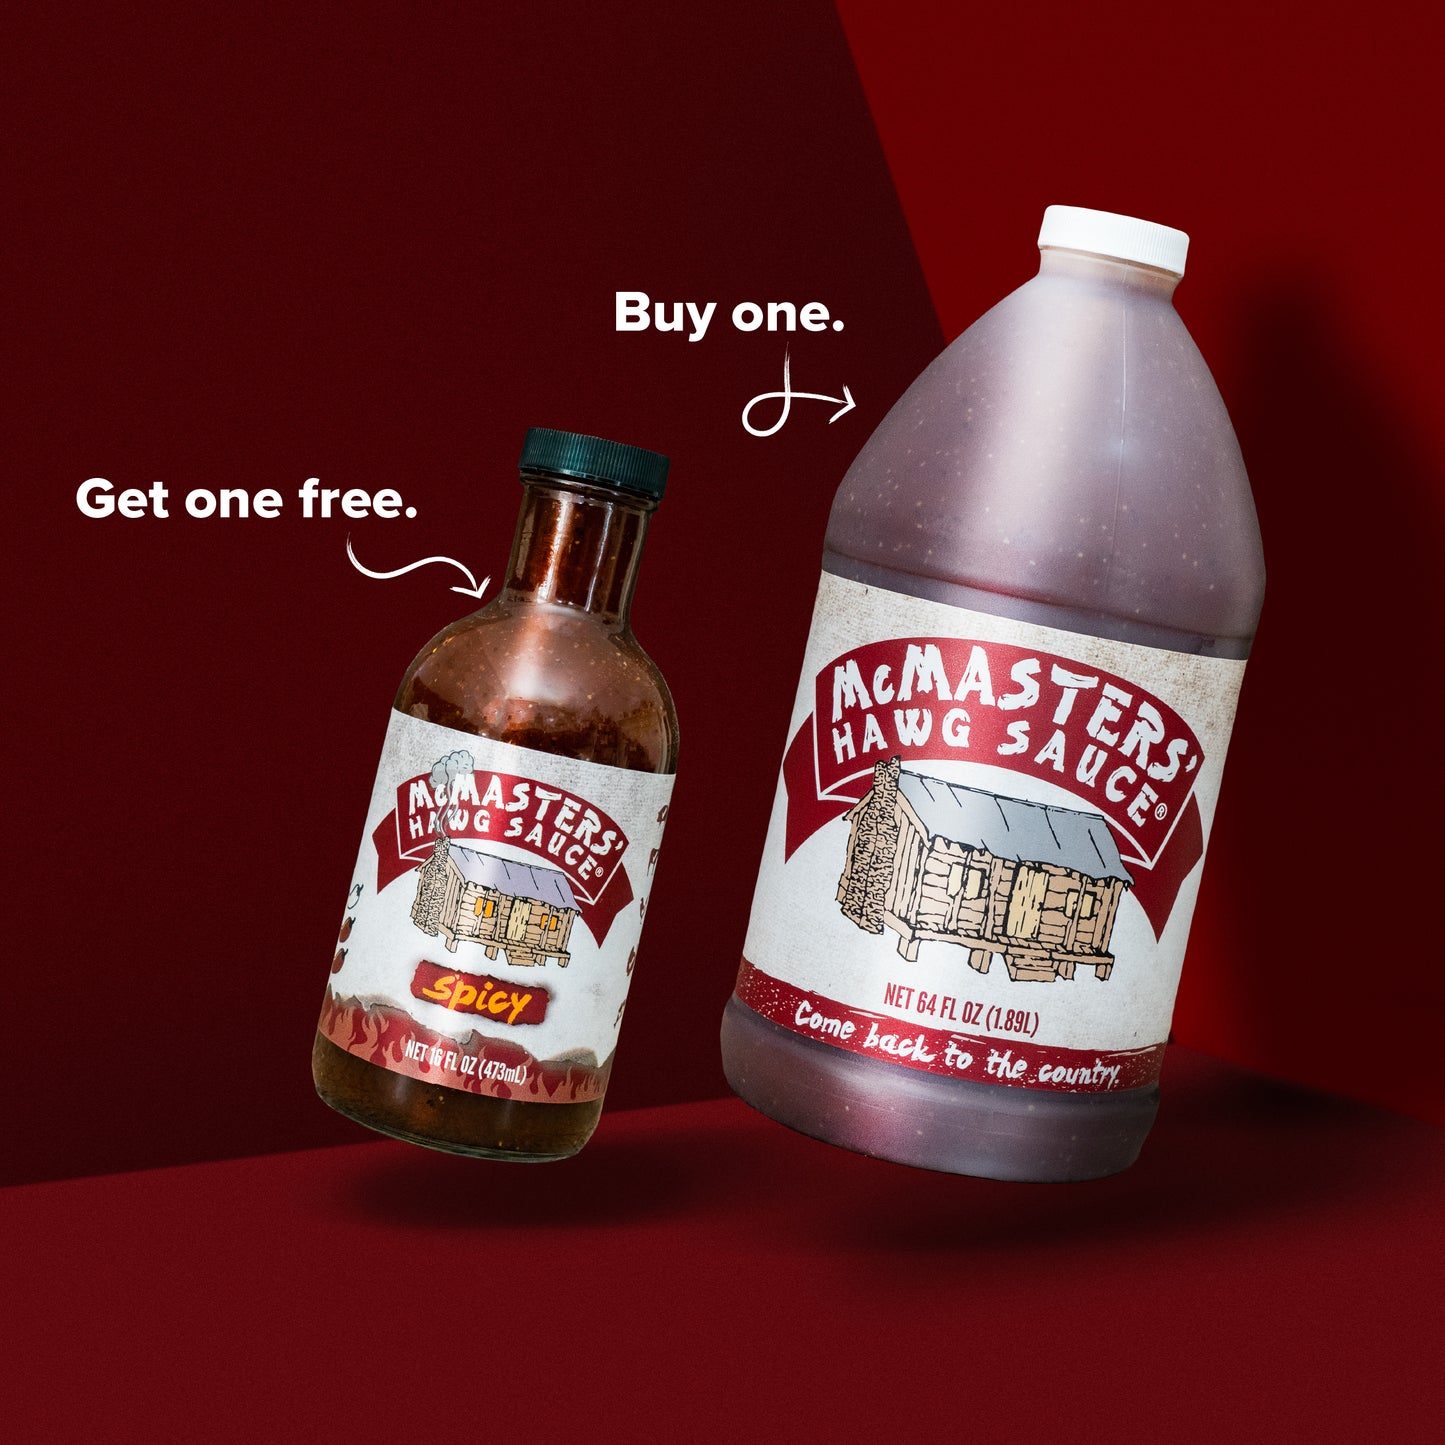 Buy a Half Gallon of Original, Get a Free Bottle of Spicy